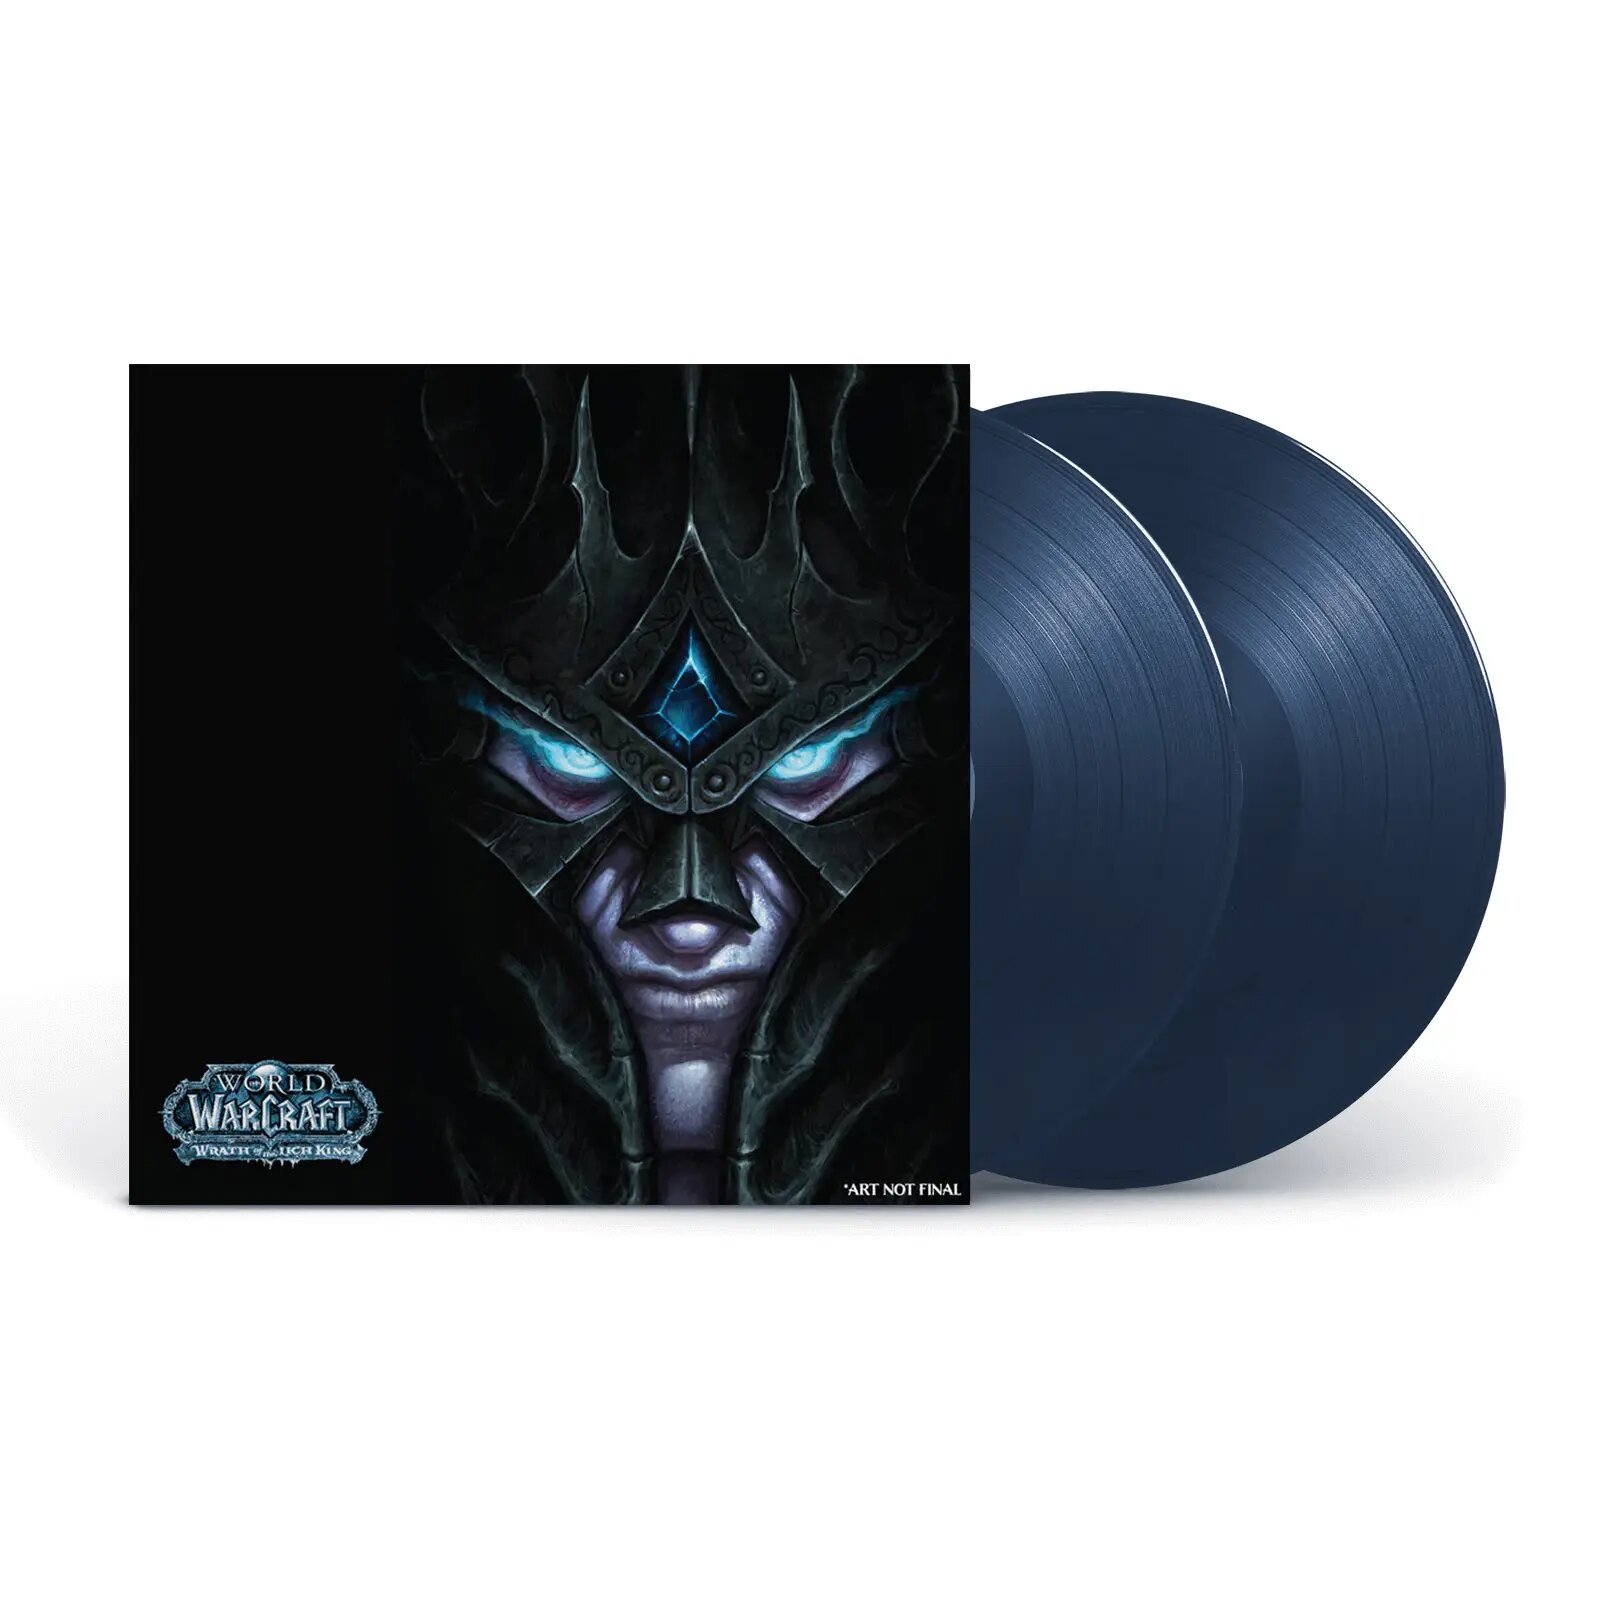 VARIOUS - WORLD OF WARCRAFT: WRATH OF THE LICH KING (2LP soundtrack, ice brown blue) виниловая пластинка